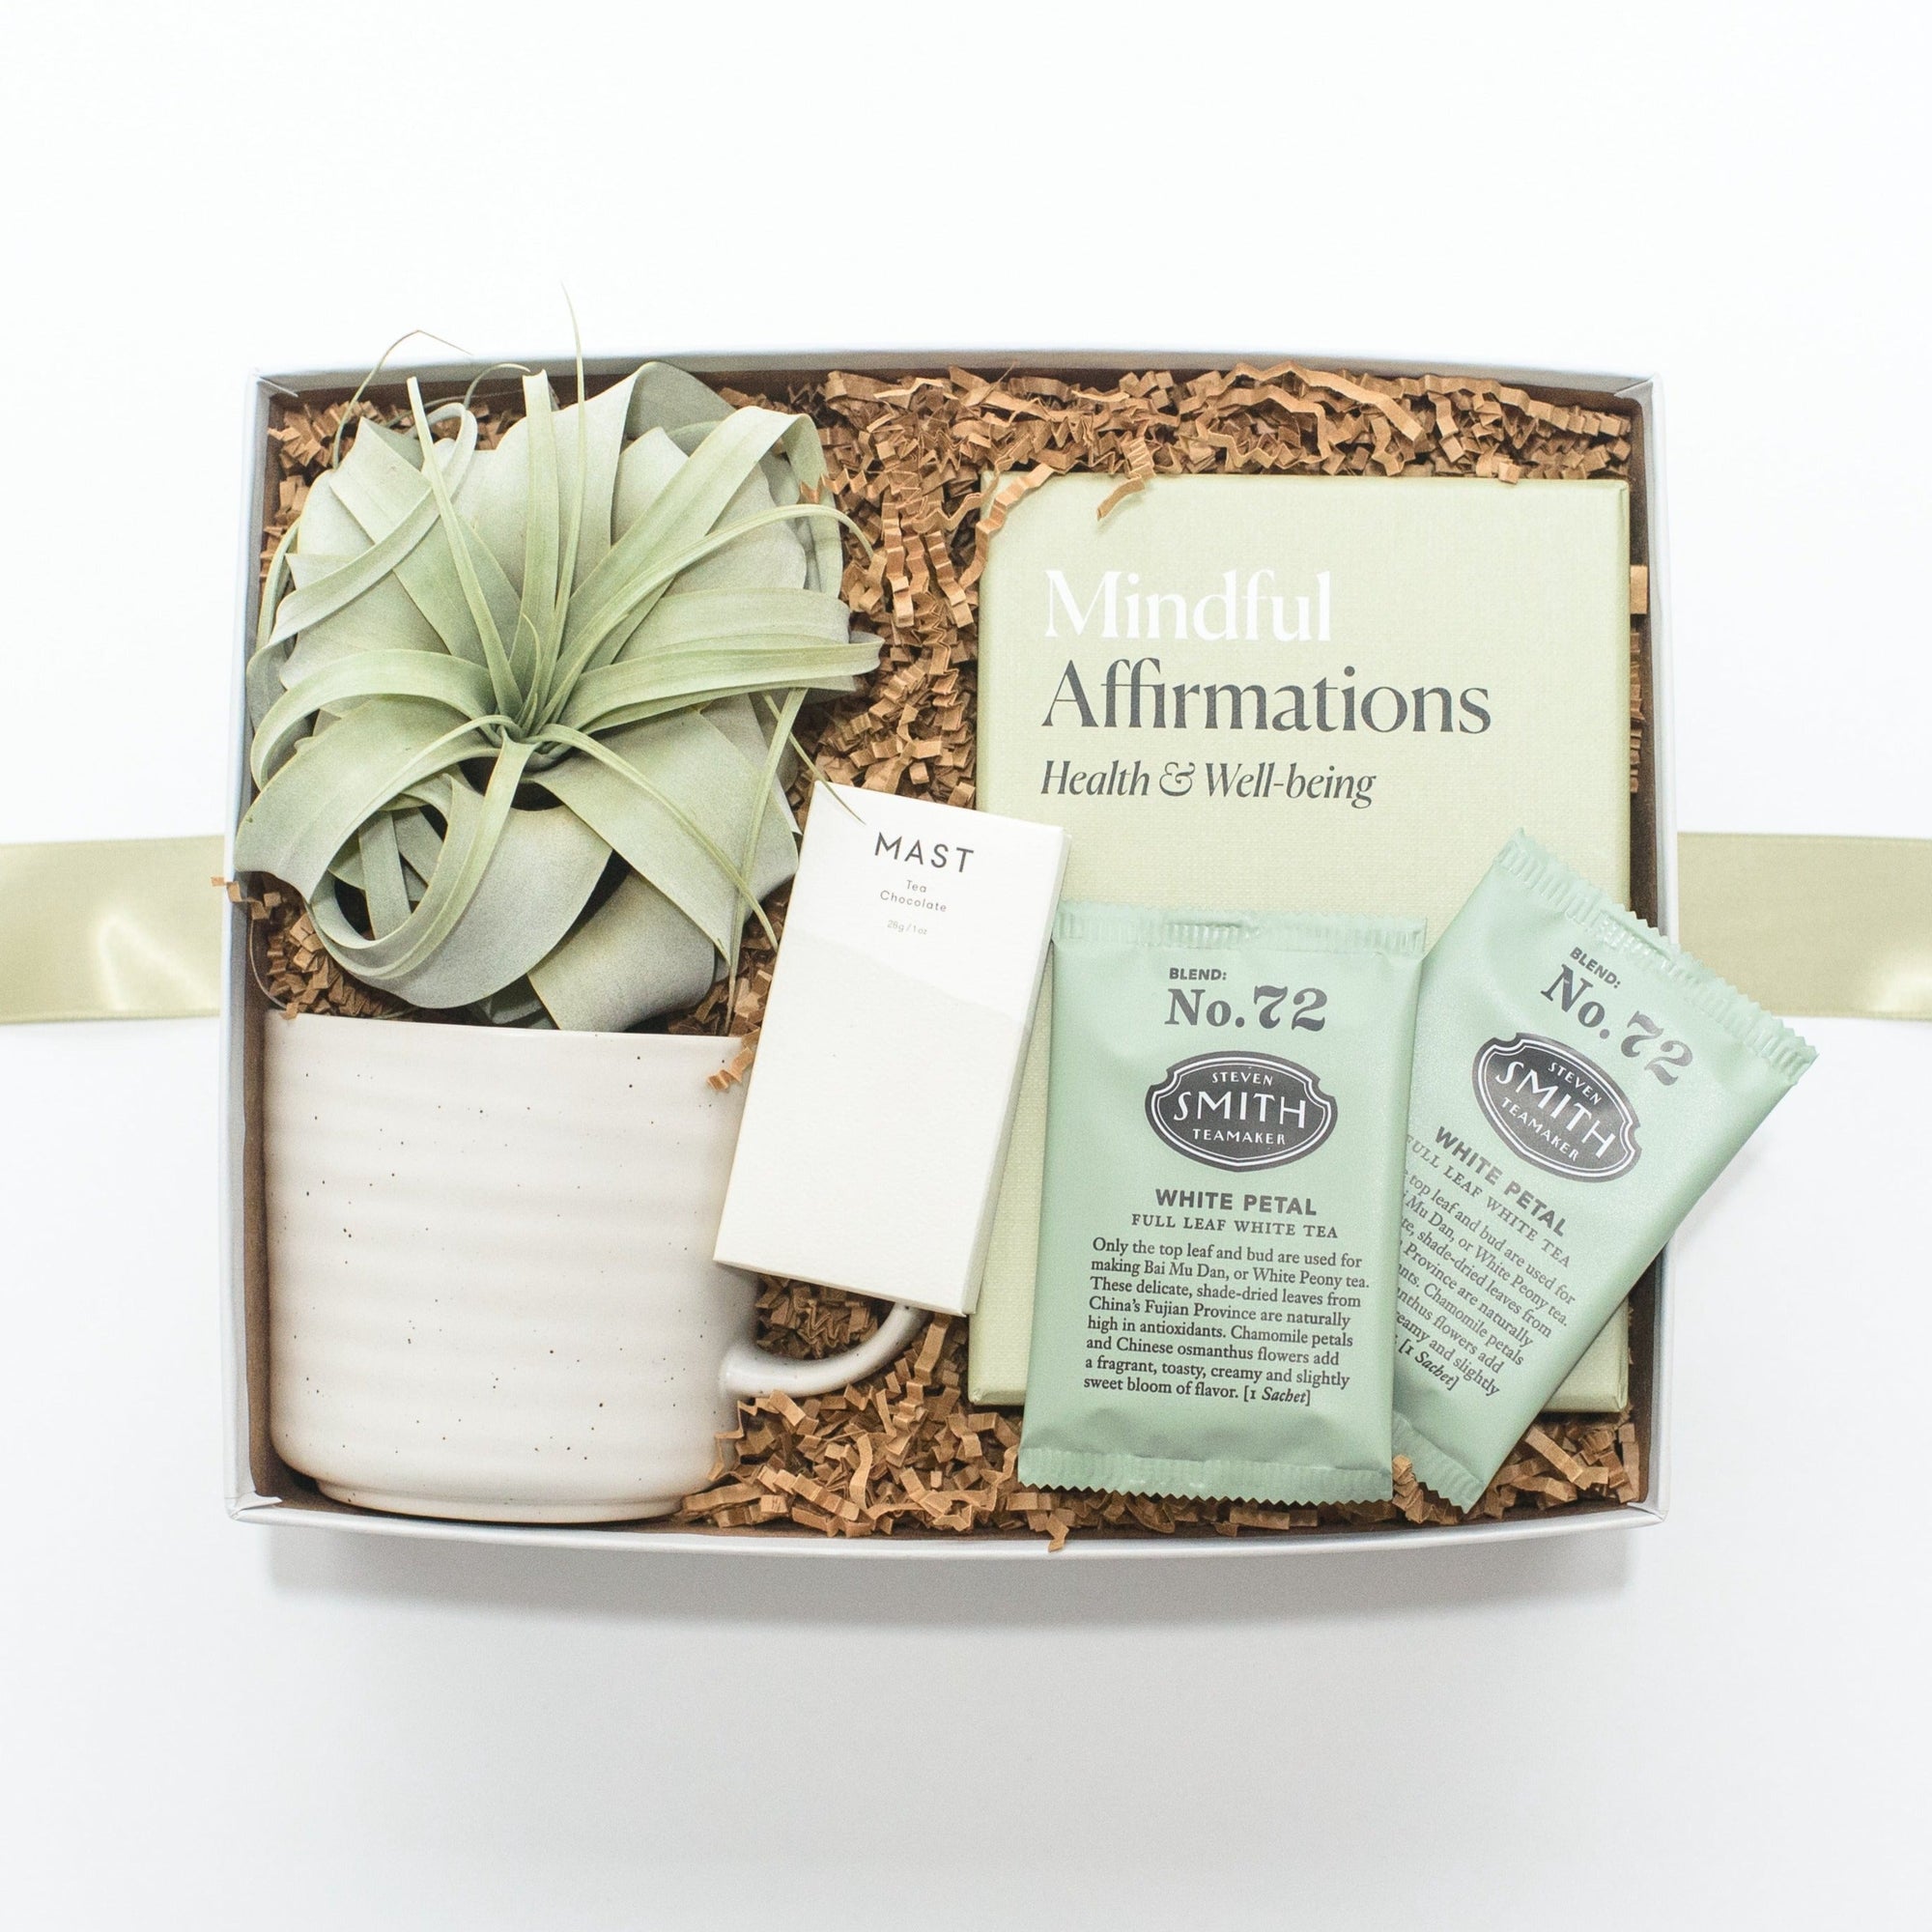 Mindfulness Gifts, Mindful Meditation Gift Box, Curated Wellness Gift Boxes, Best Employee Relaxation Gifts, Client Gifting, Gifts for College Students, Relaxing Tea Gift Basket, Sympathy Gifts, Thinking of You Gift